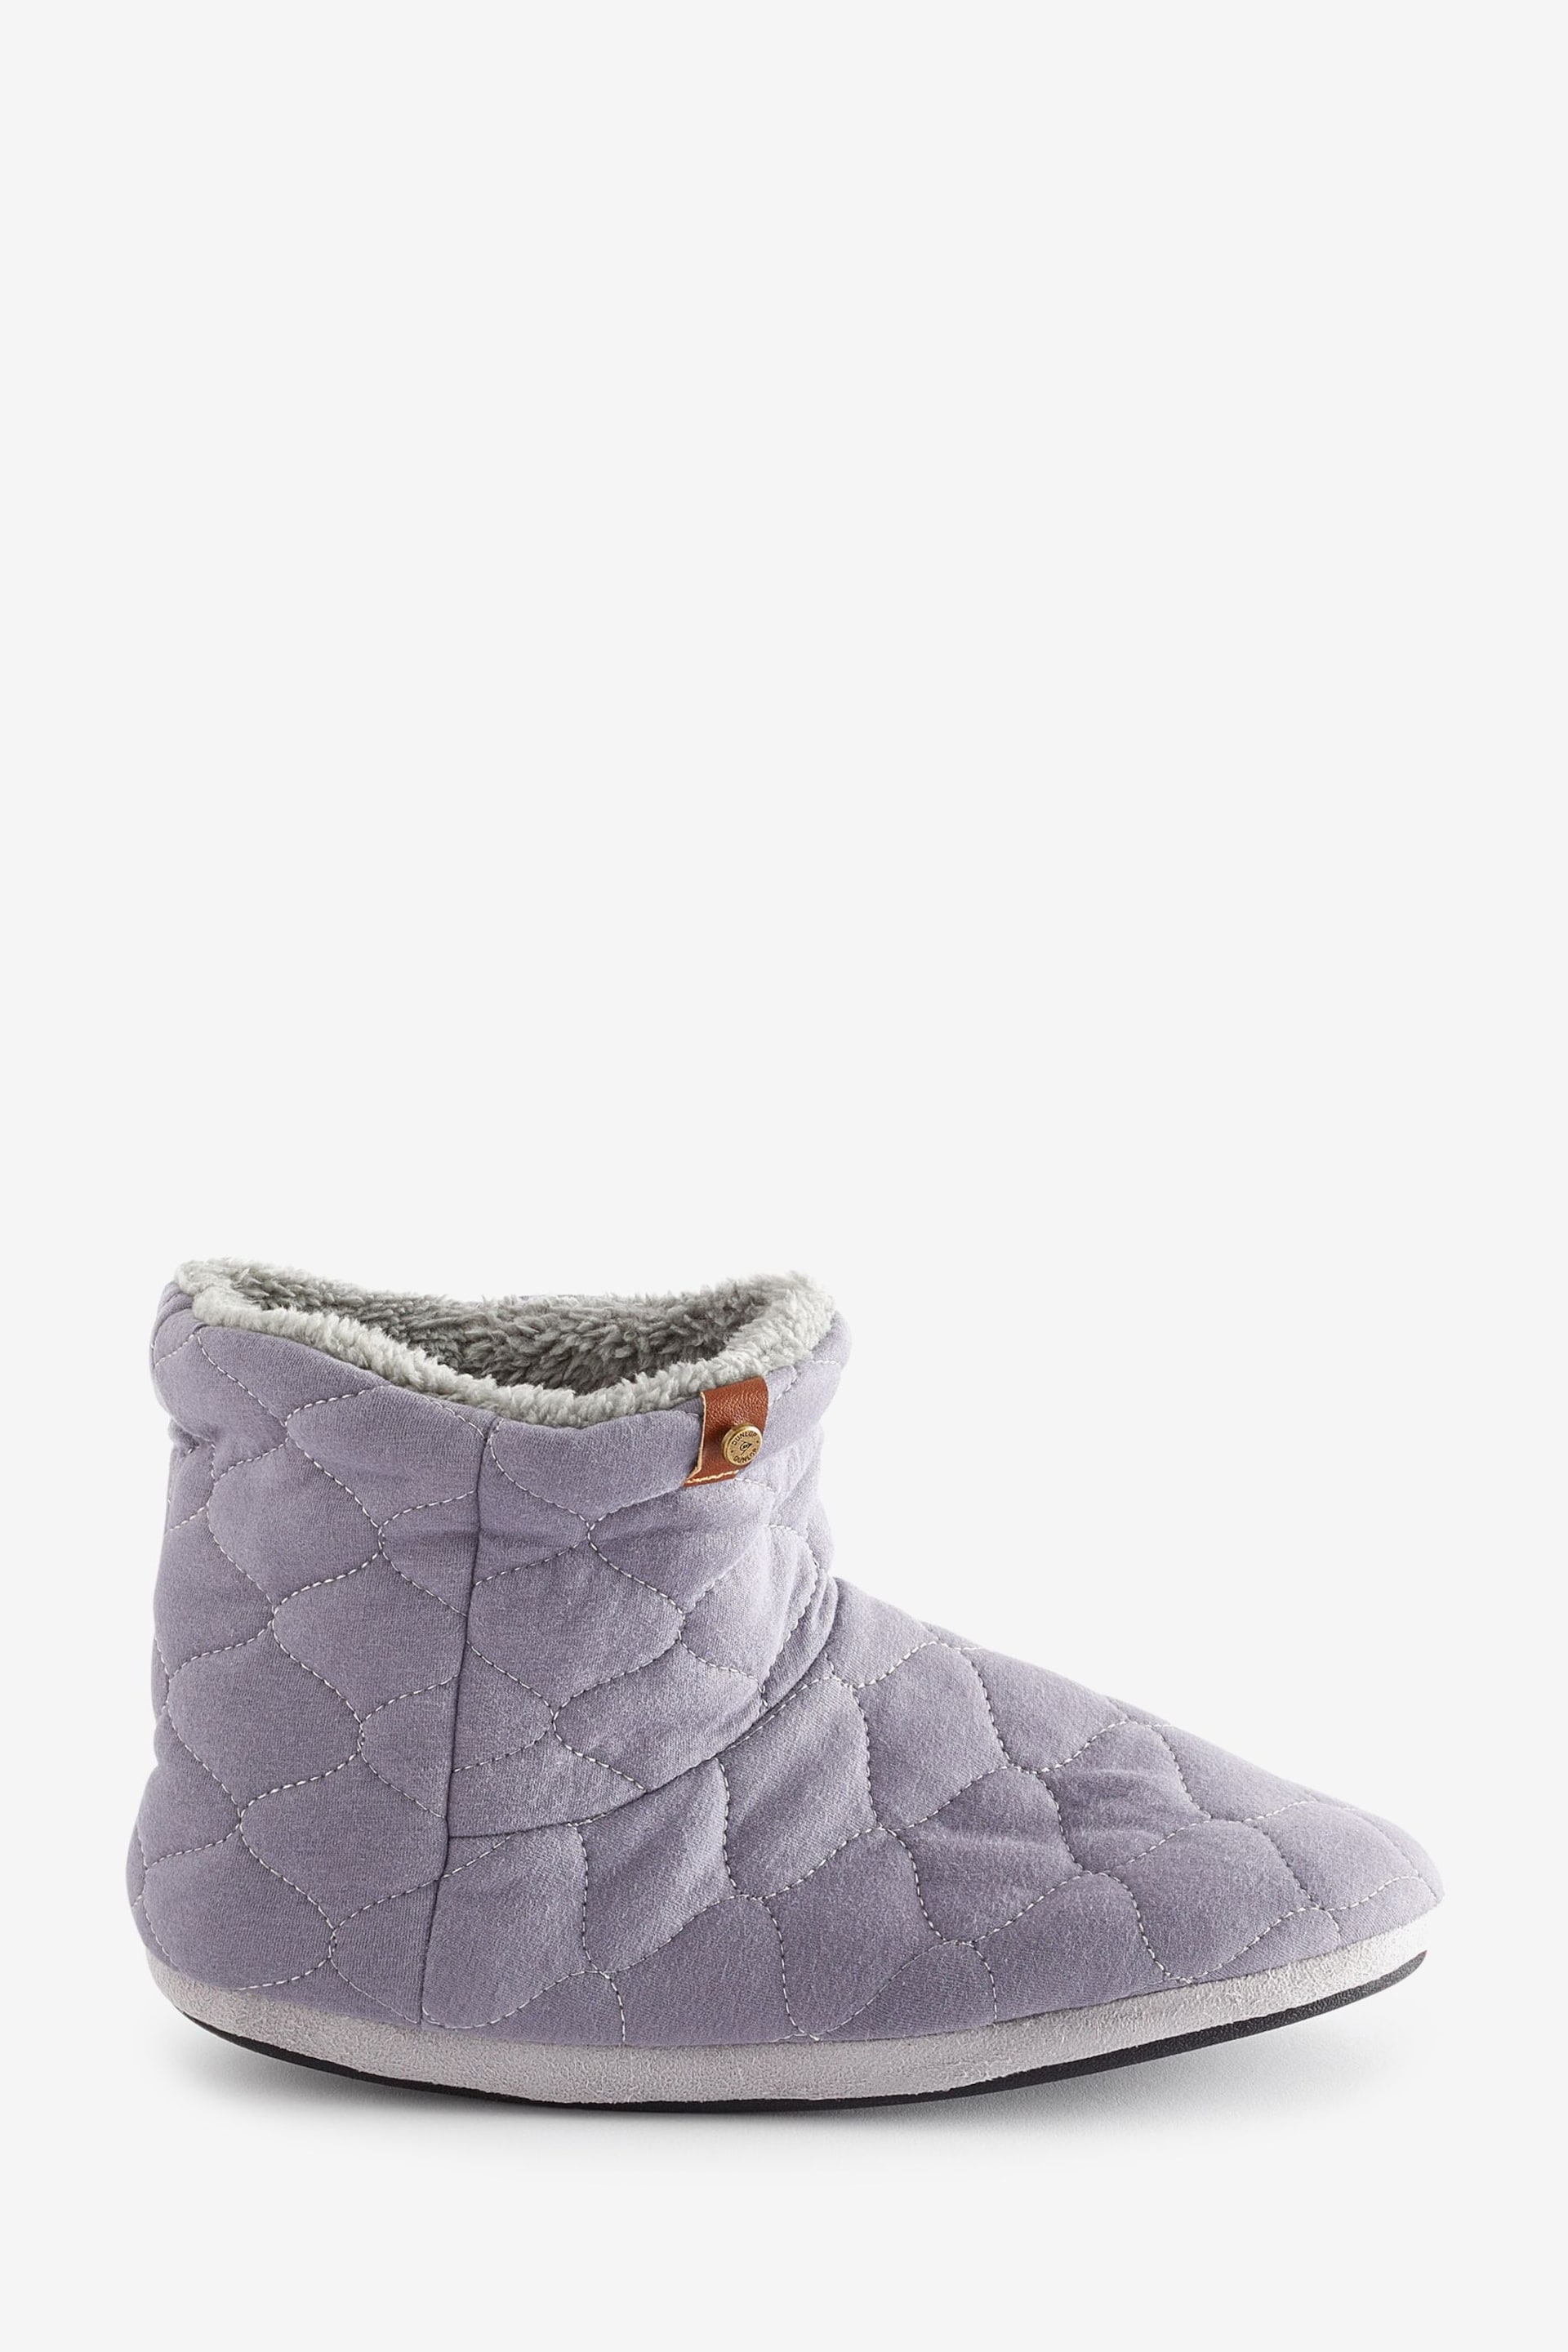 Dunlop Purple Quilted Bootee Mens Slippers - Image 1 of 1